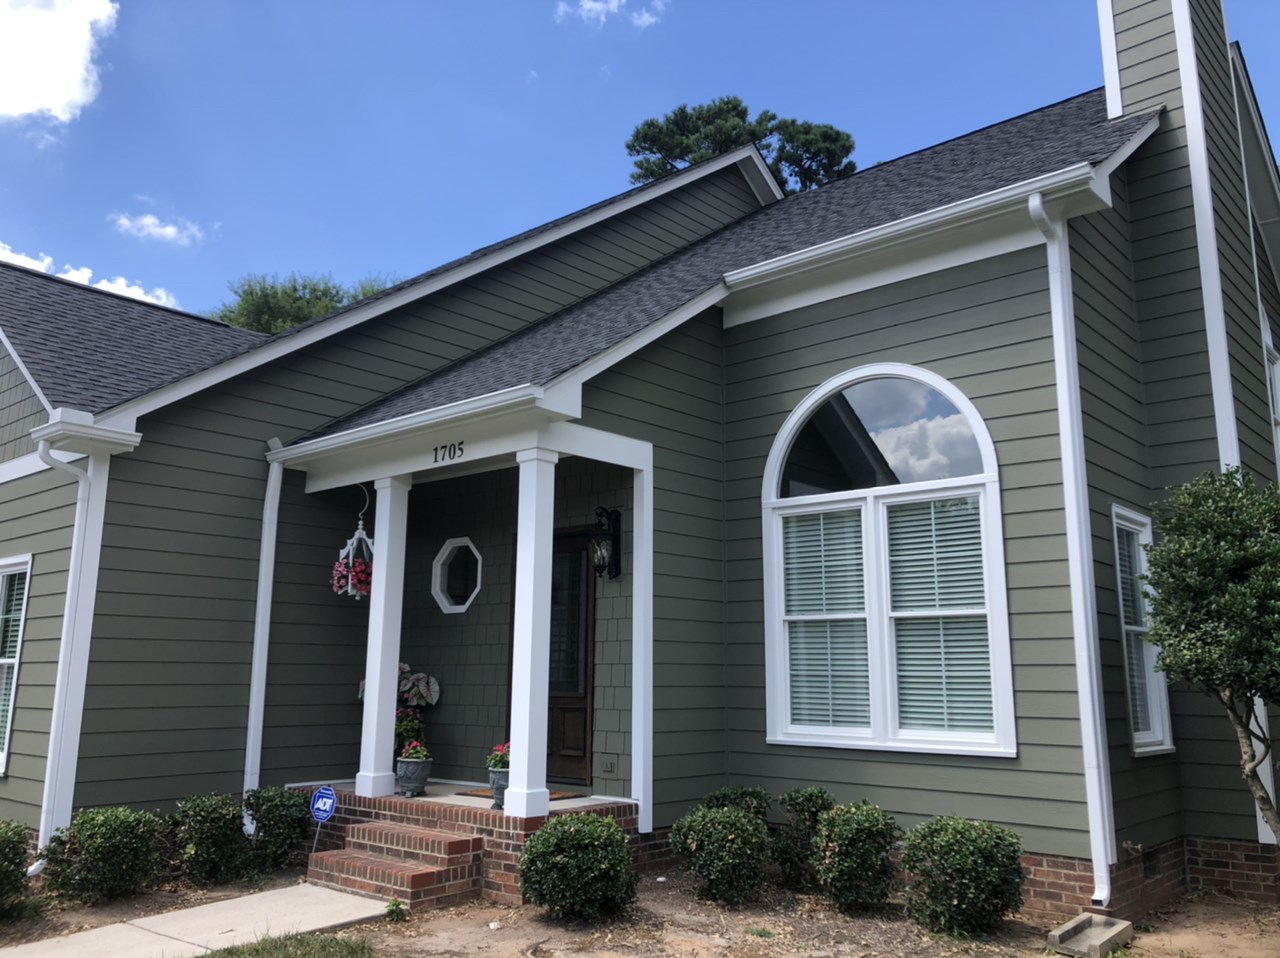 Rebecca R. – Raleigh James Hardie Siding Replacement